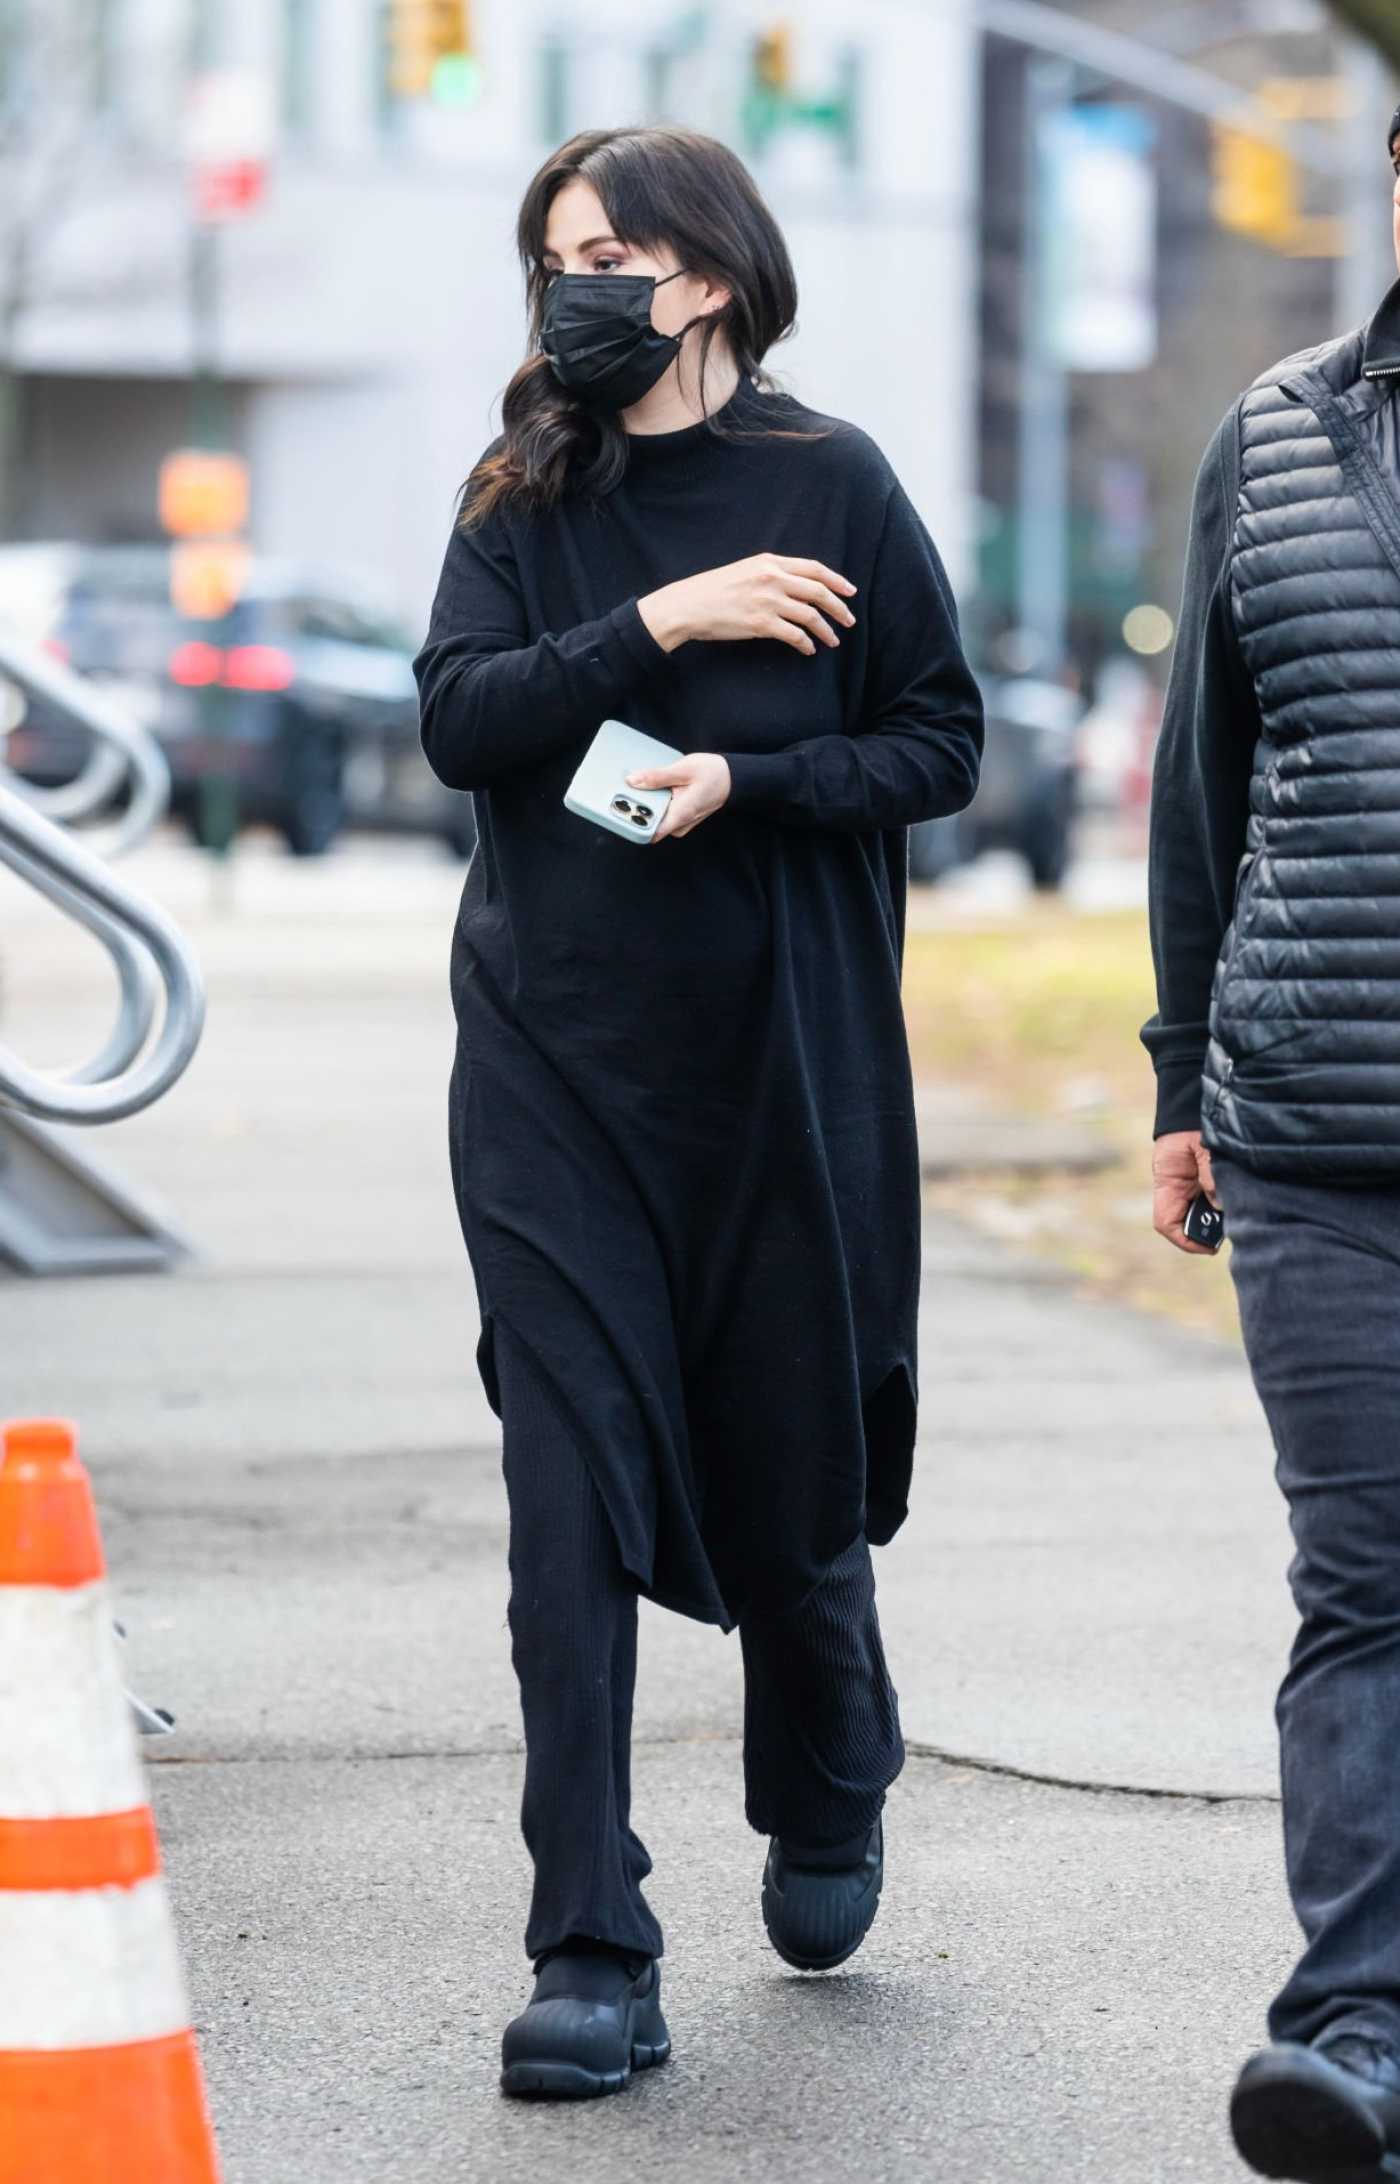 Selena Gomez in a Black Outfit on the Set of Only Murders in the Building Season 3 in New York City 01/18/2023